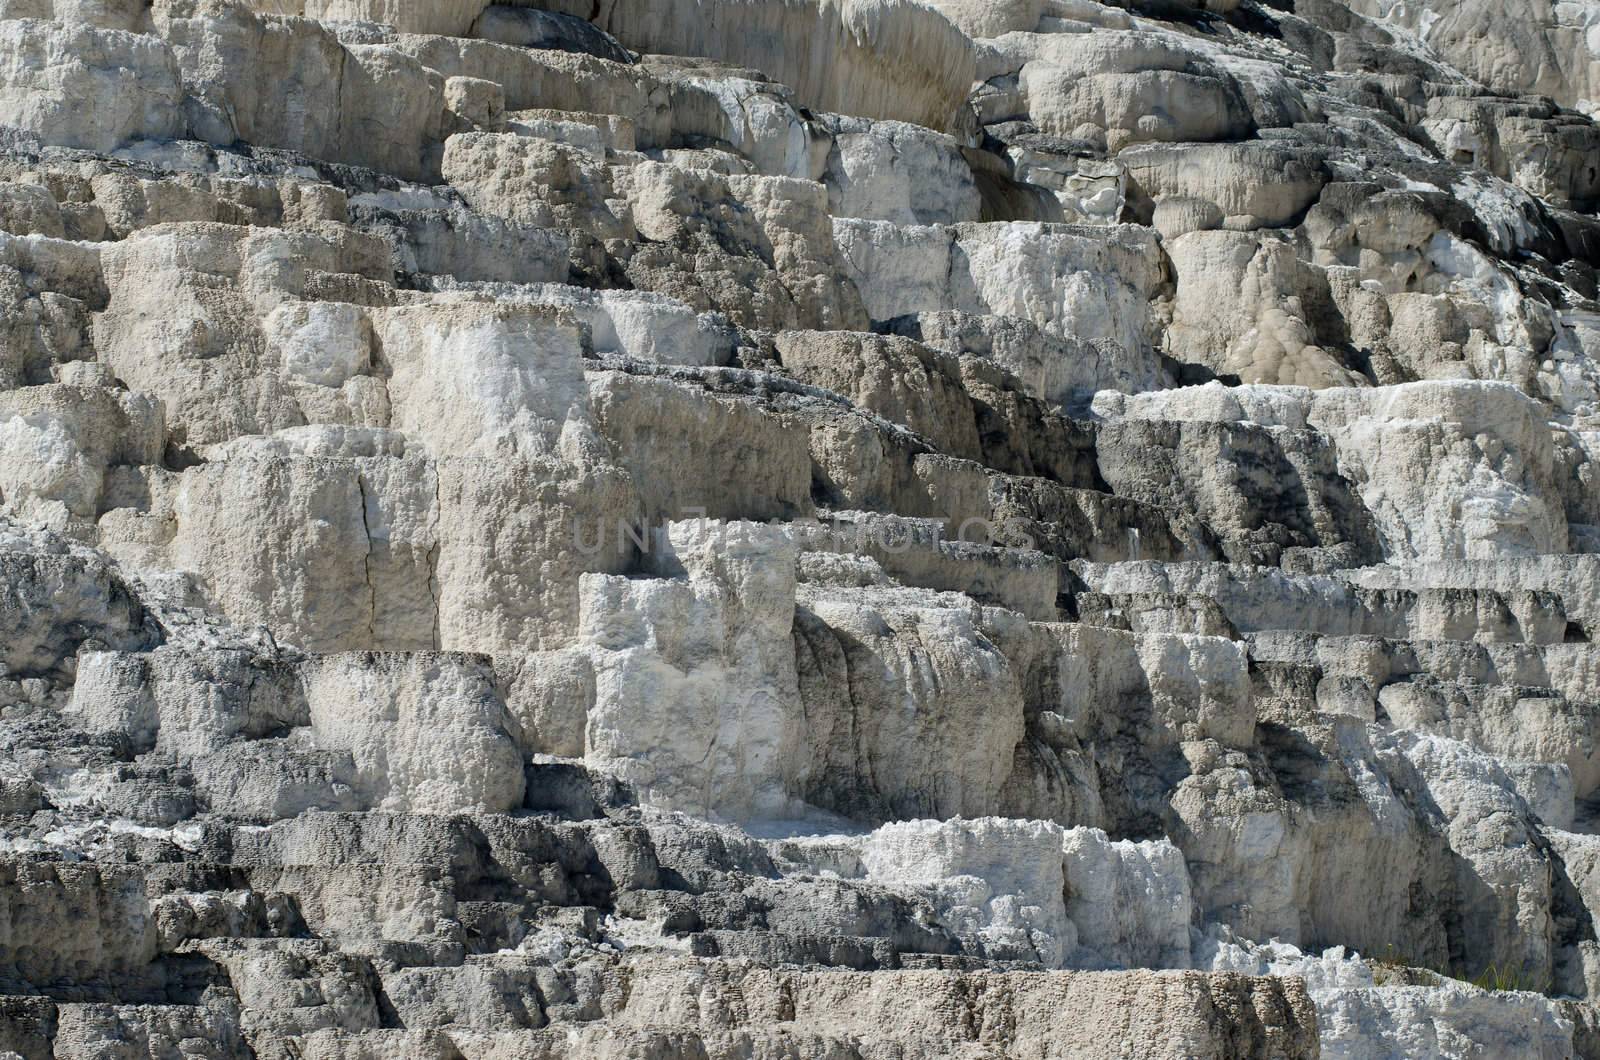 Travertine (limestone) terraces of Minerva Terrace during dormant period, Yellowstone National Park, Park County, Wyoming, USA by CharlesBolin